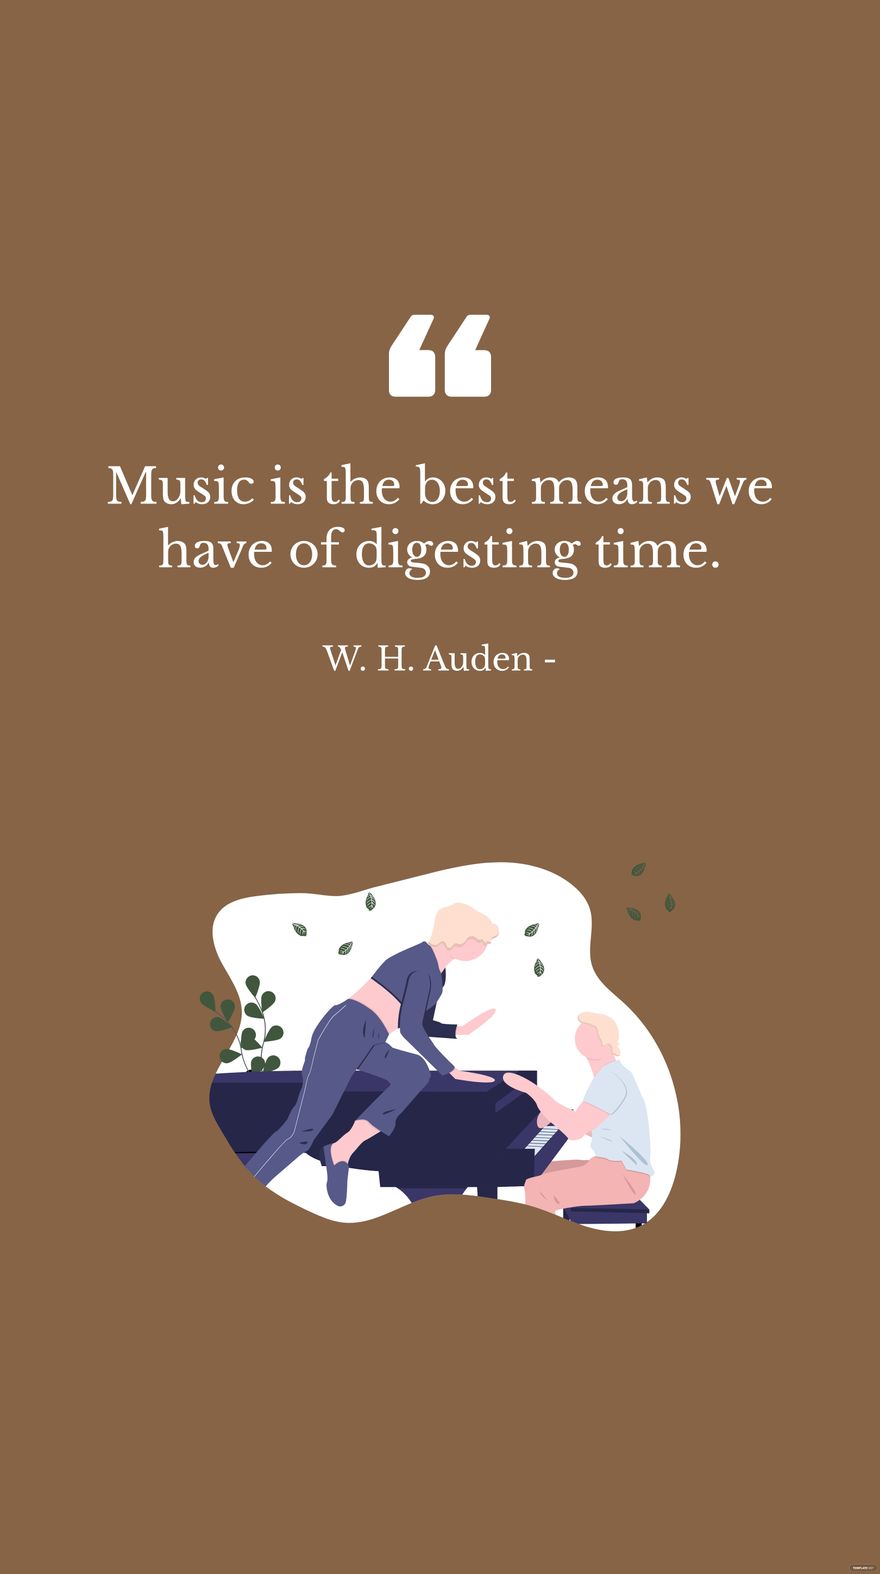 Free W. H. Auden - Music is the best means we have of digesting time. in JPG